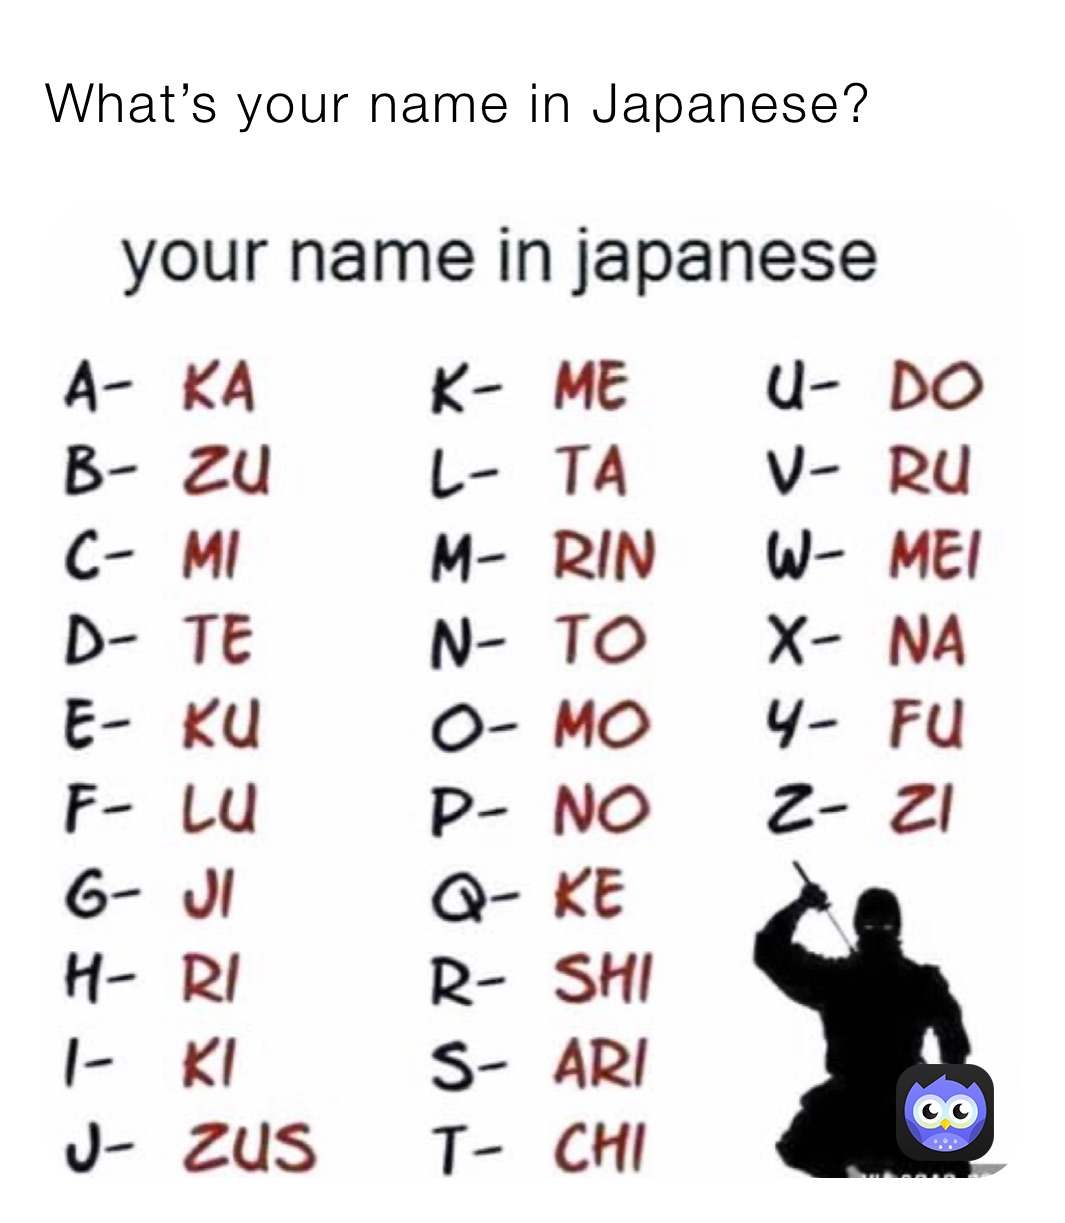 What’s your name in Japanese?